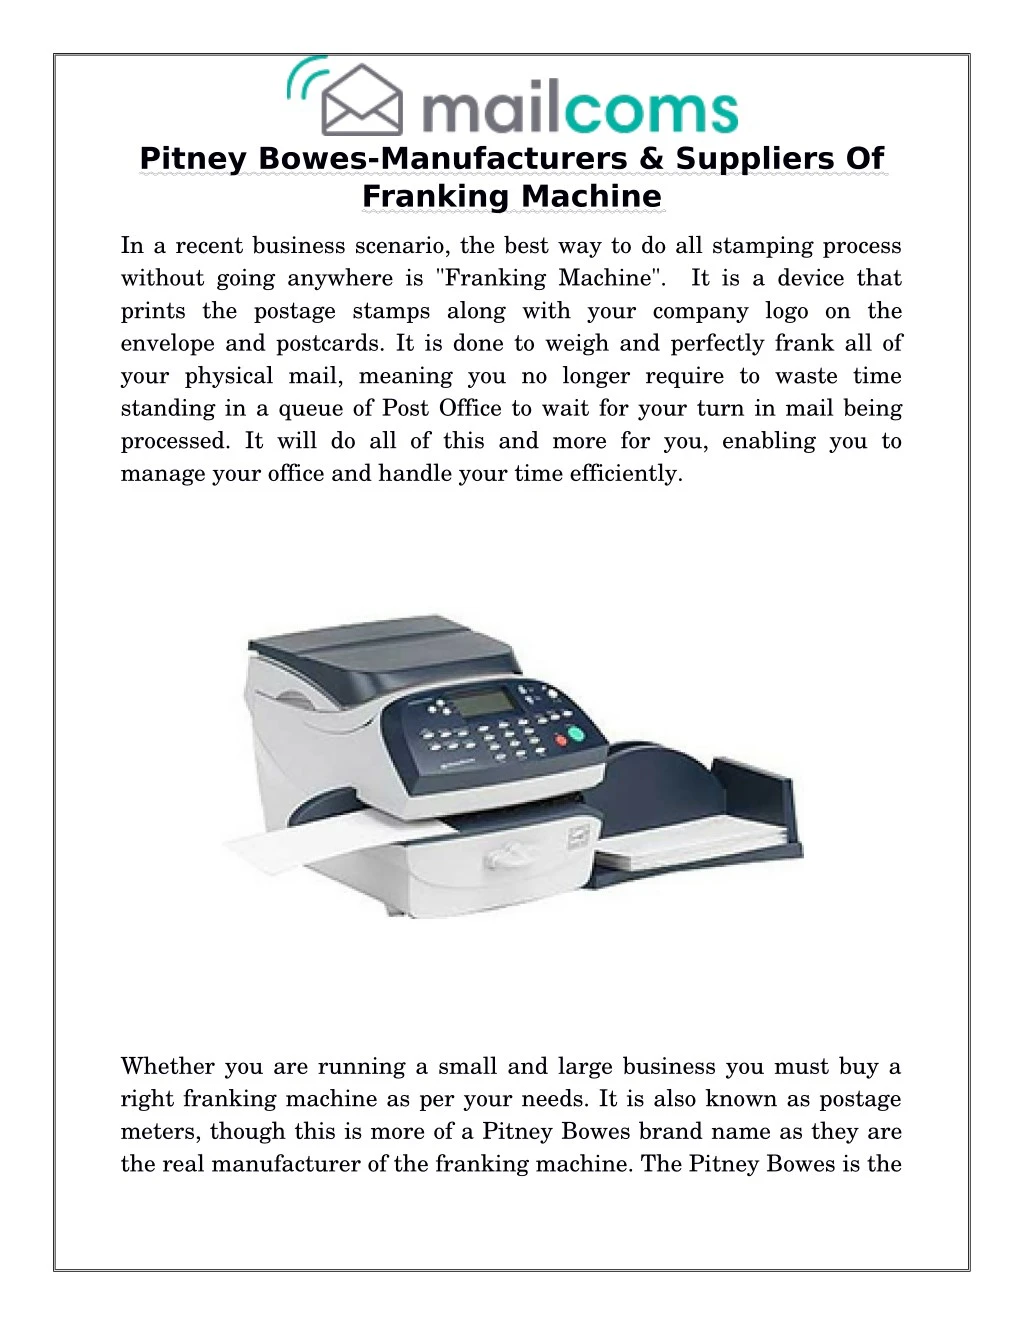 pitney bowes manufacturers suppliers of franking